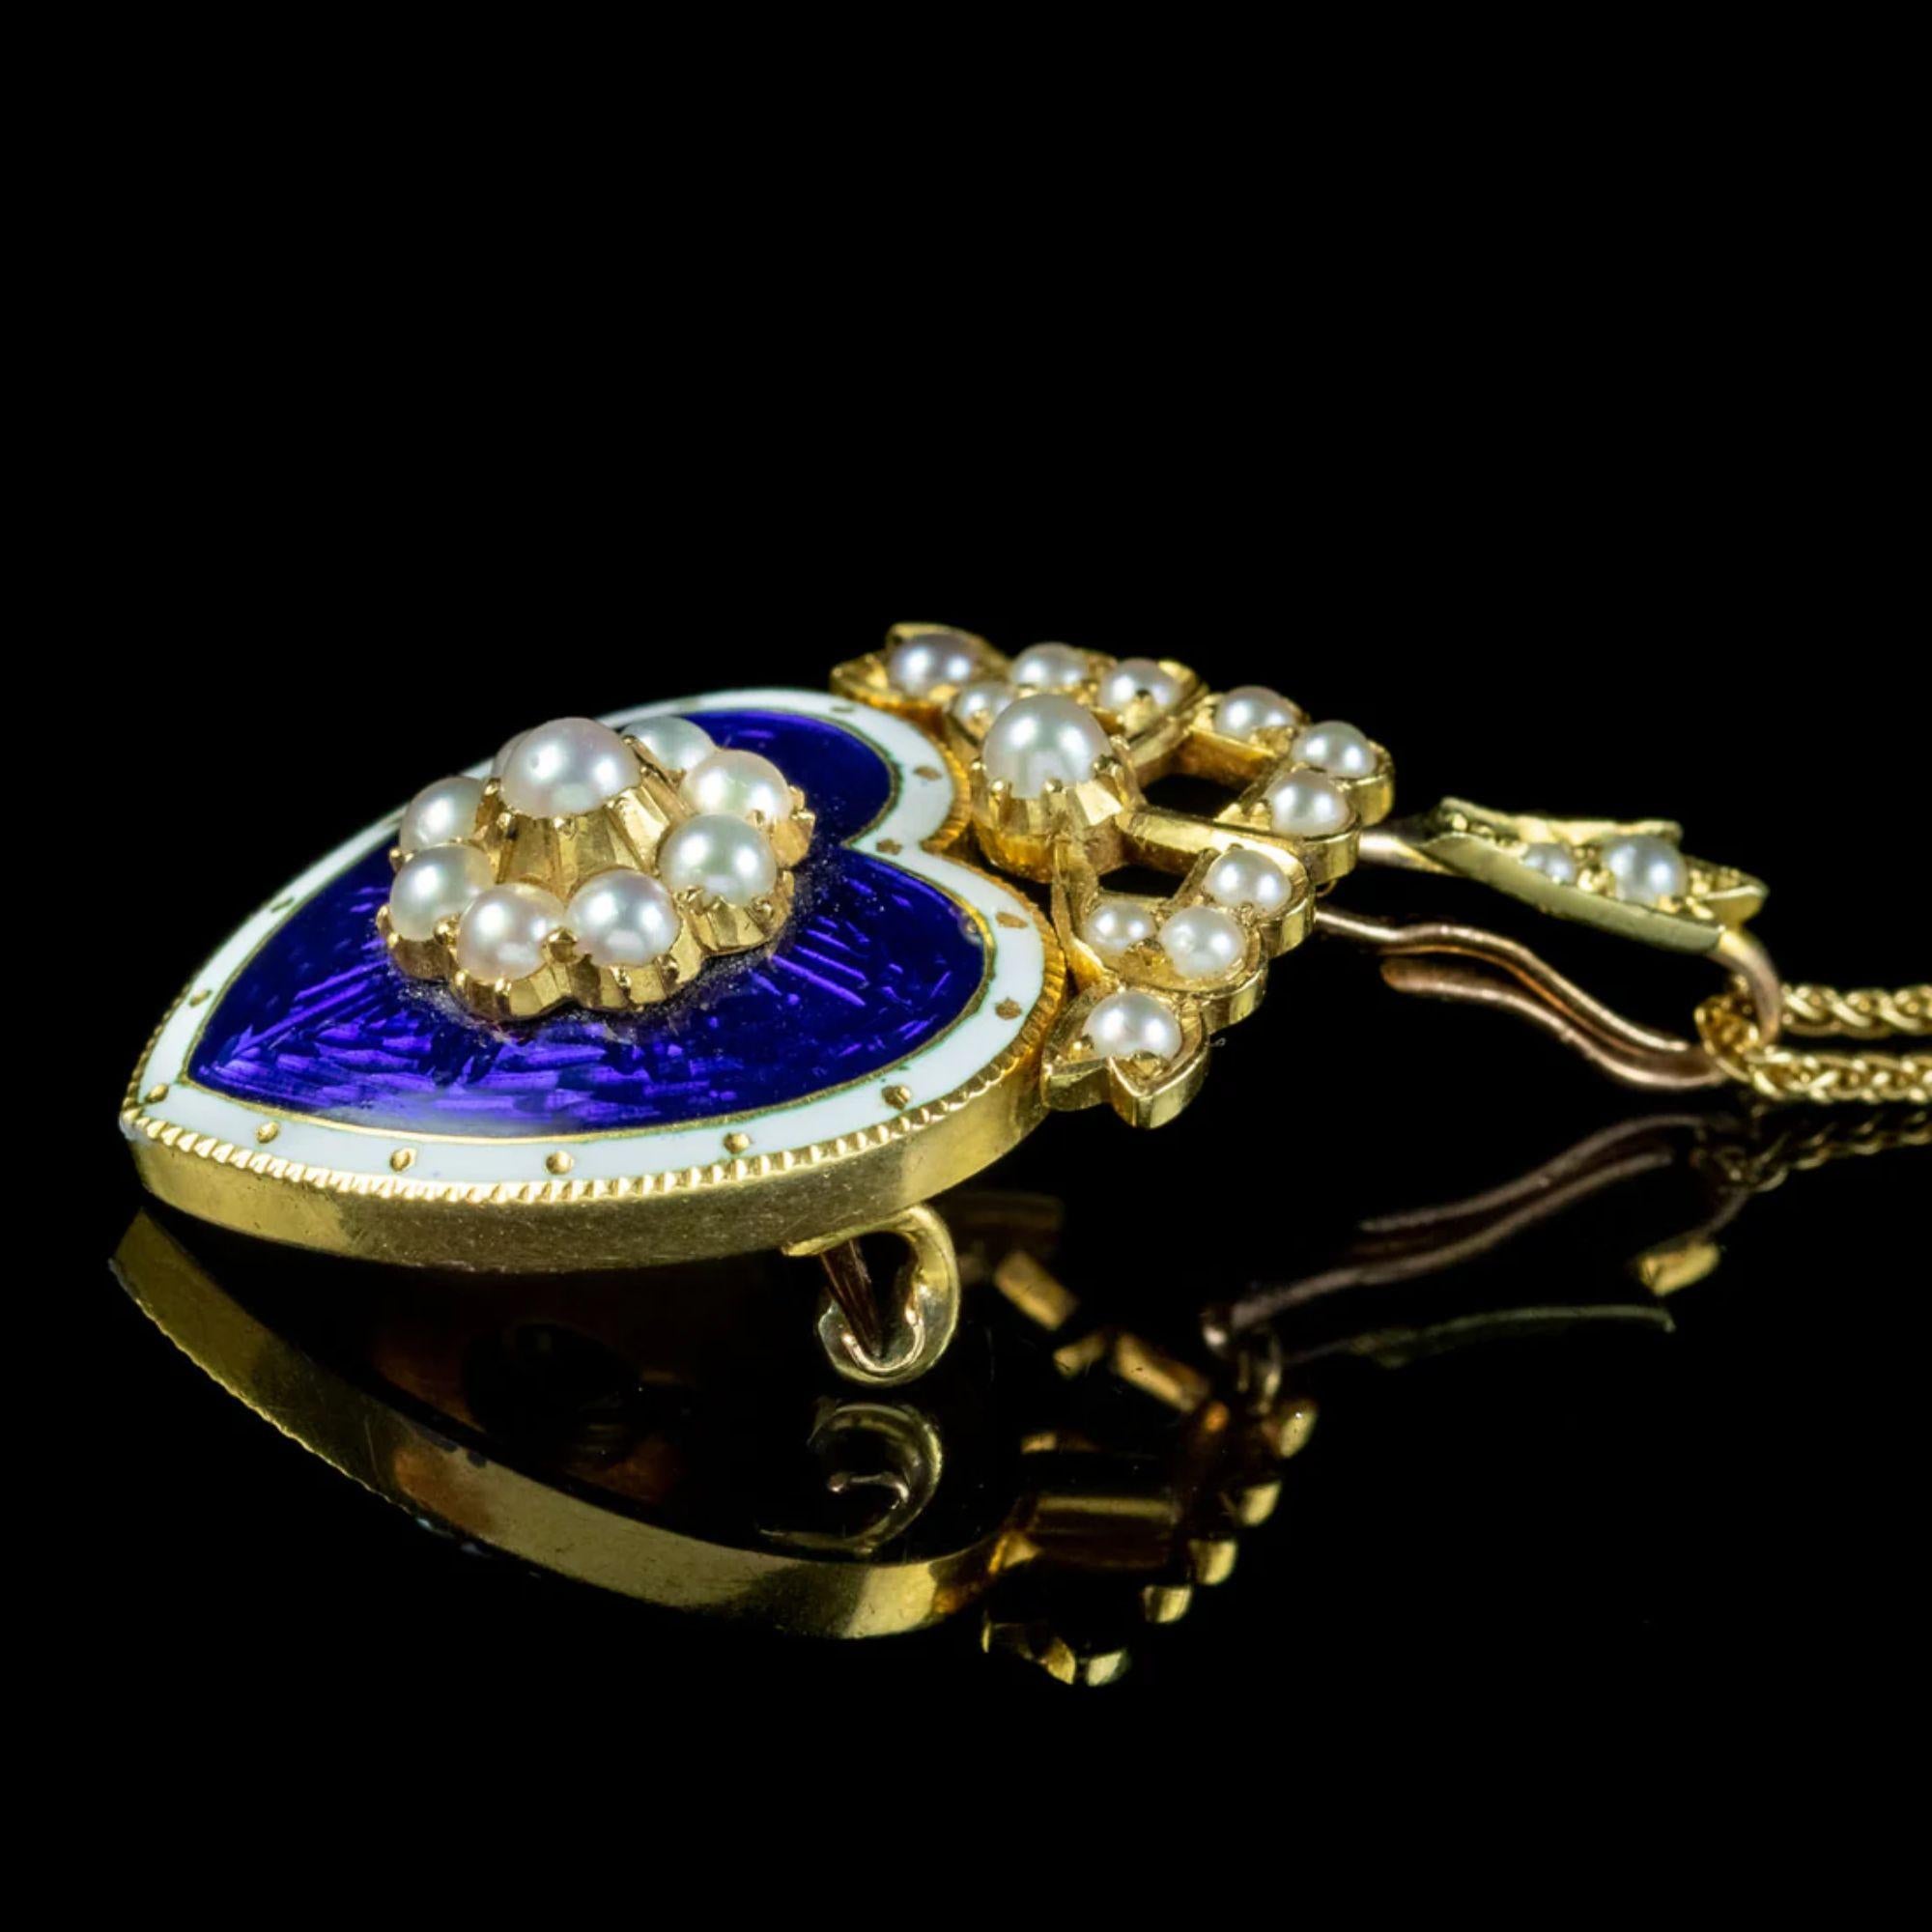 A beautiful antique Edwardian pendant from the turn of the 20th Century depicting a heart, with a pearl flower in the centre and a pearl bow on top. It’s fashioned in 18ct gold and layered in a royal blue, guilloche enamel with a white border.